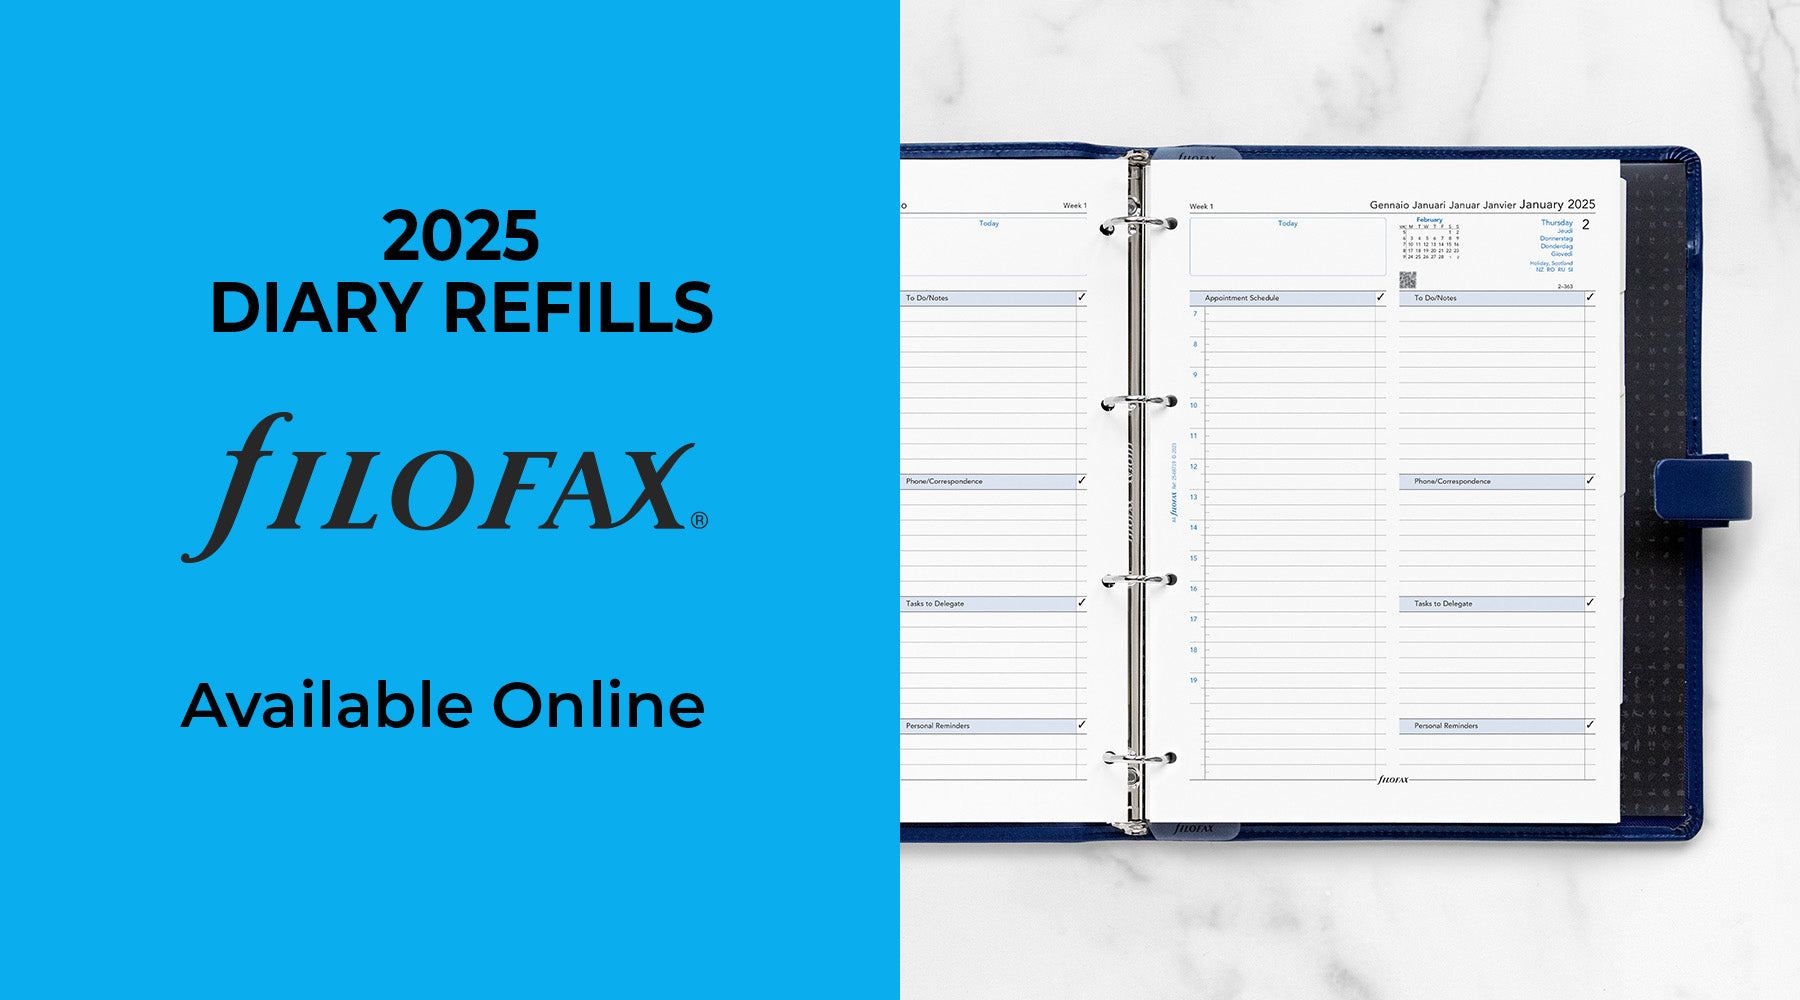 Filofax 2025 Diary Refills - Available to Order Online